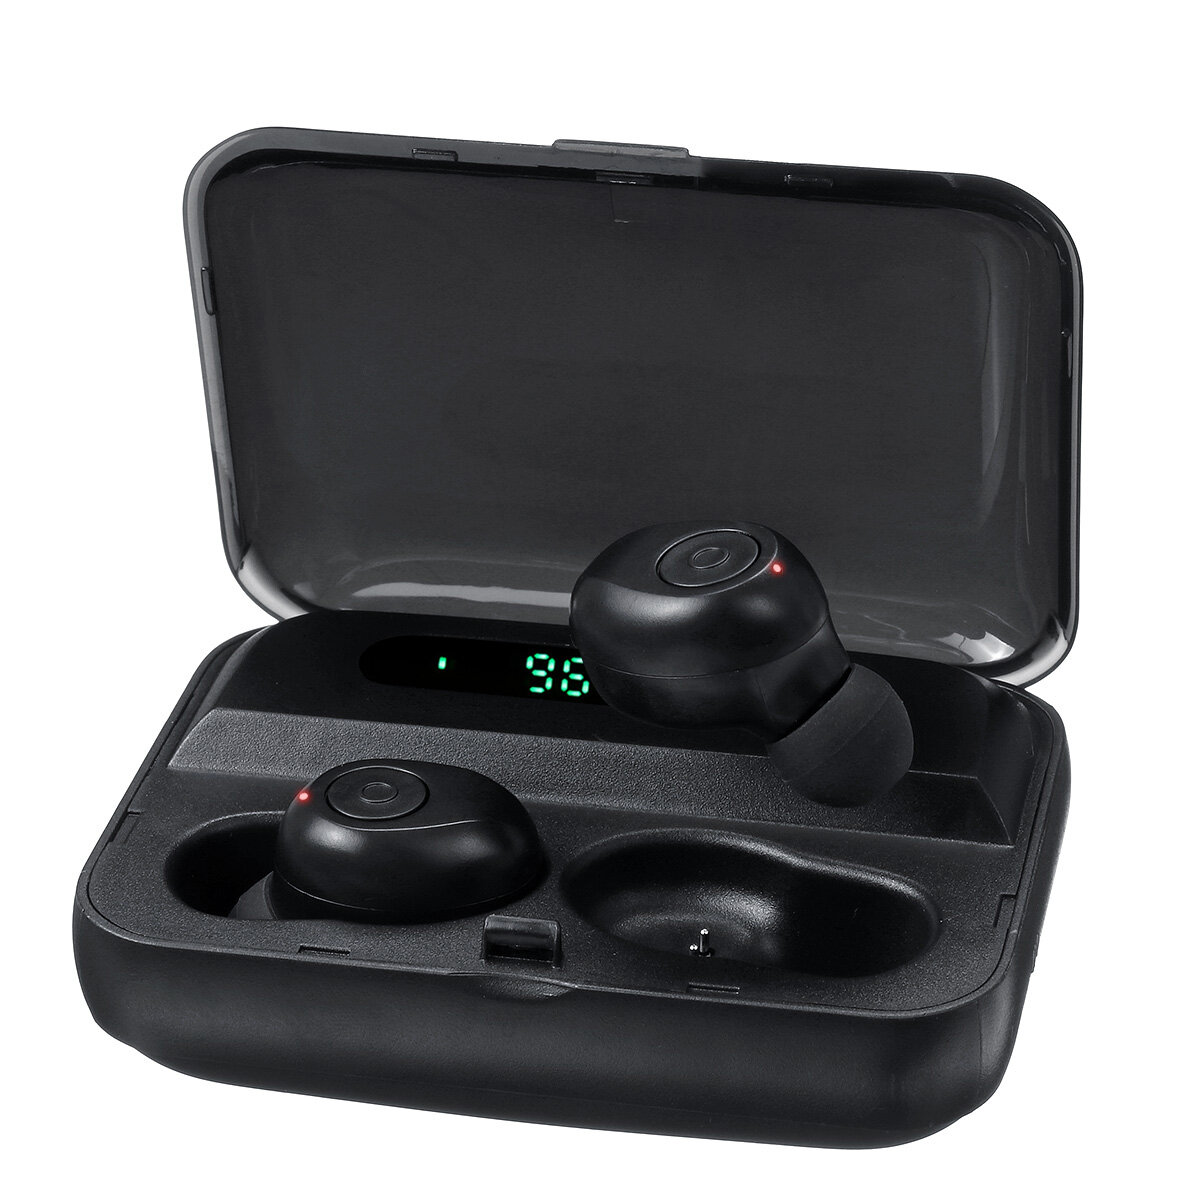 Portable TWS Wireless bluetooth Stereo Earphone Intelligent Control Waterproof Earbuds with LED Digital Display Charging